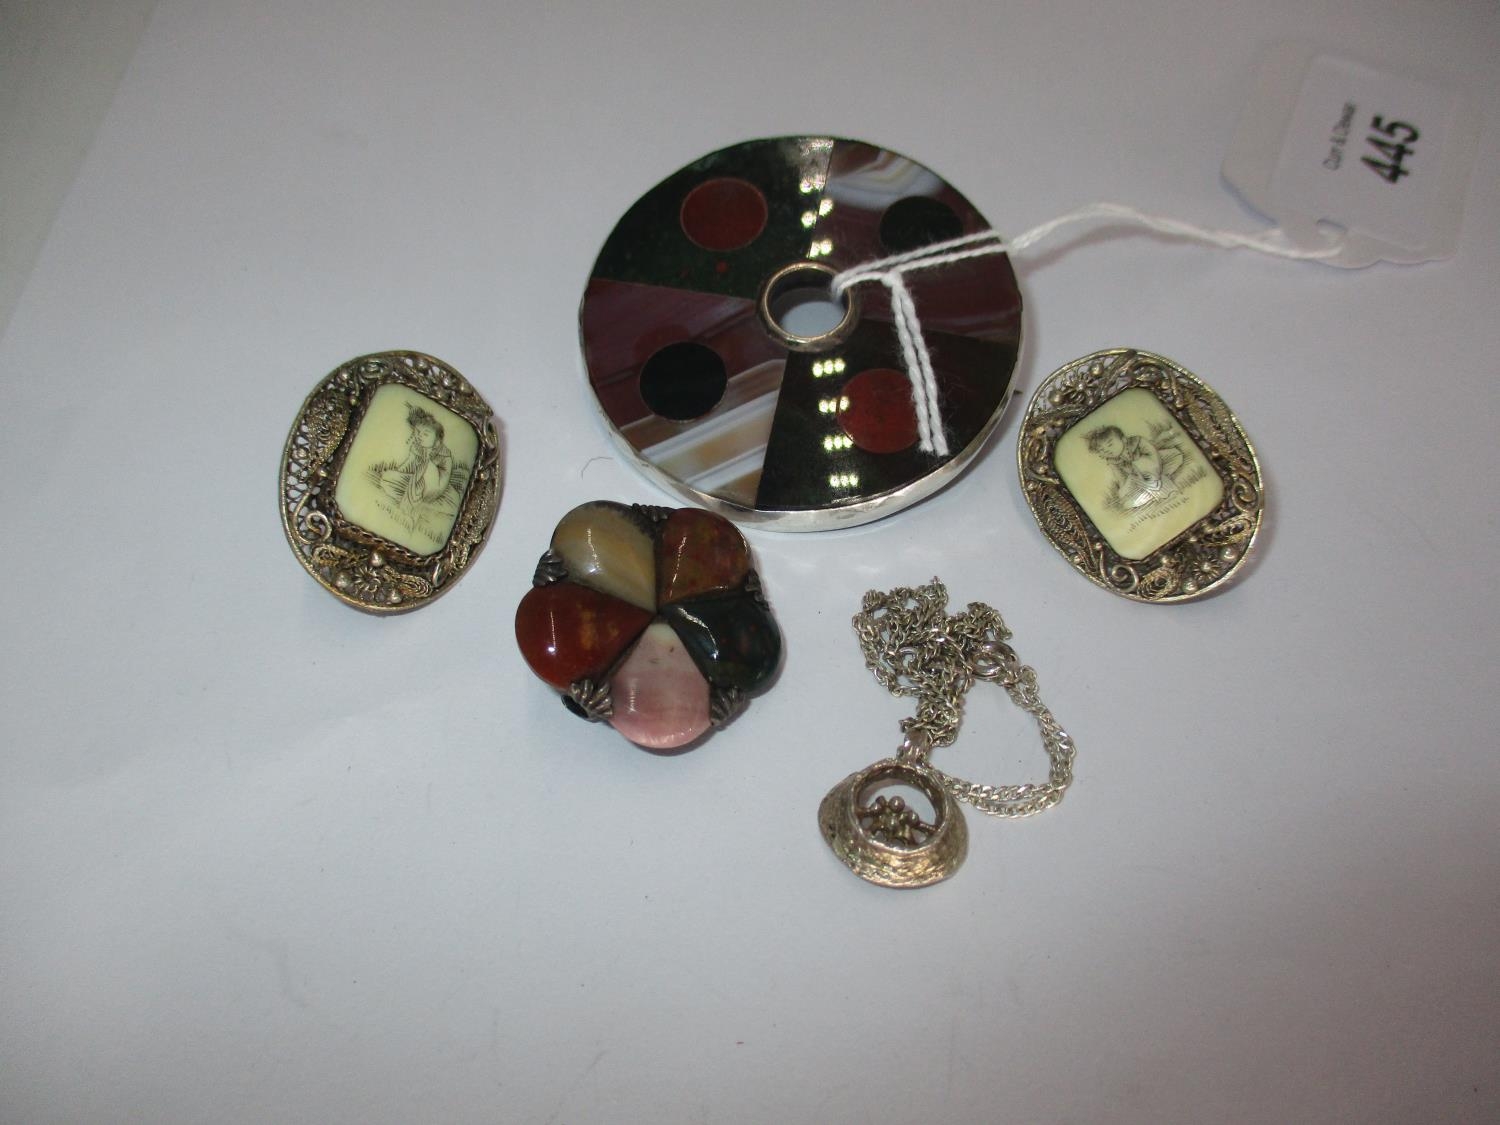 Two Faulty Agate Brooches, Silver and Other Charms, Bangle, Bracelet, Necklace, 2 Agate Brooches (